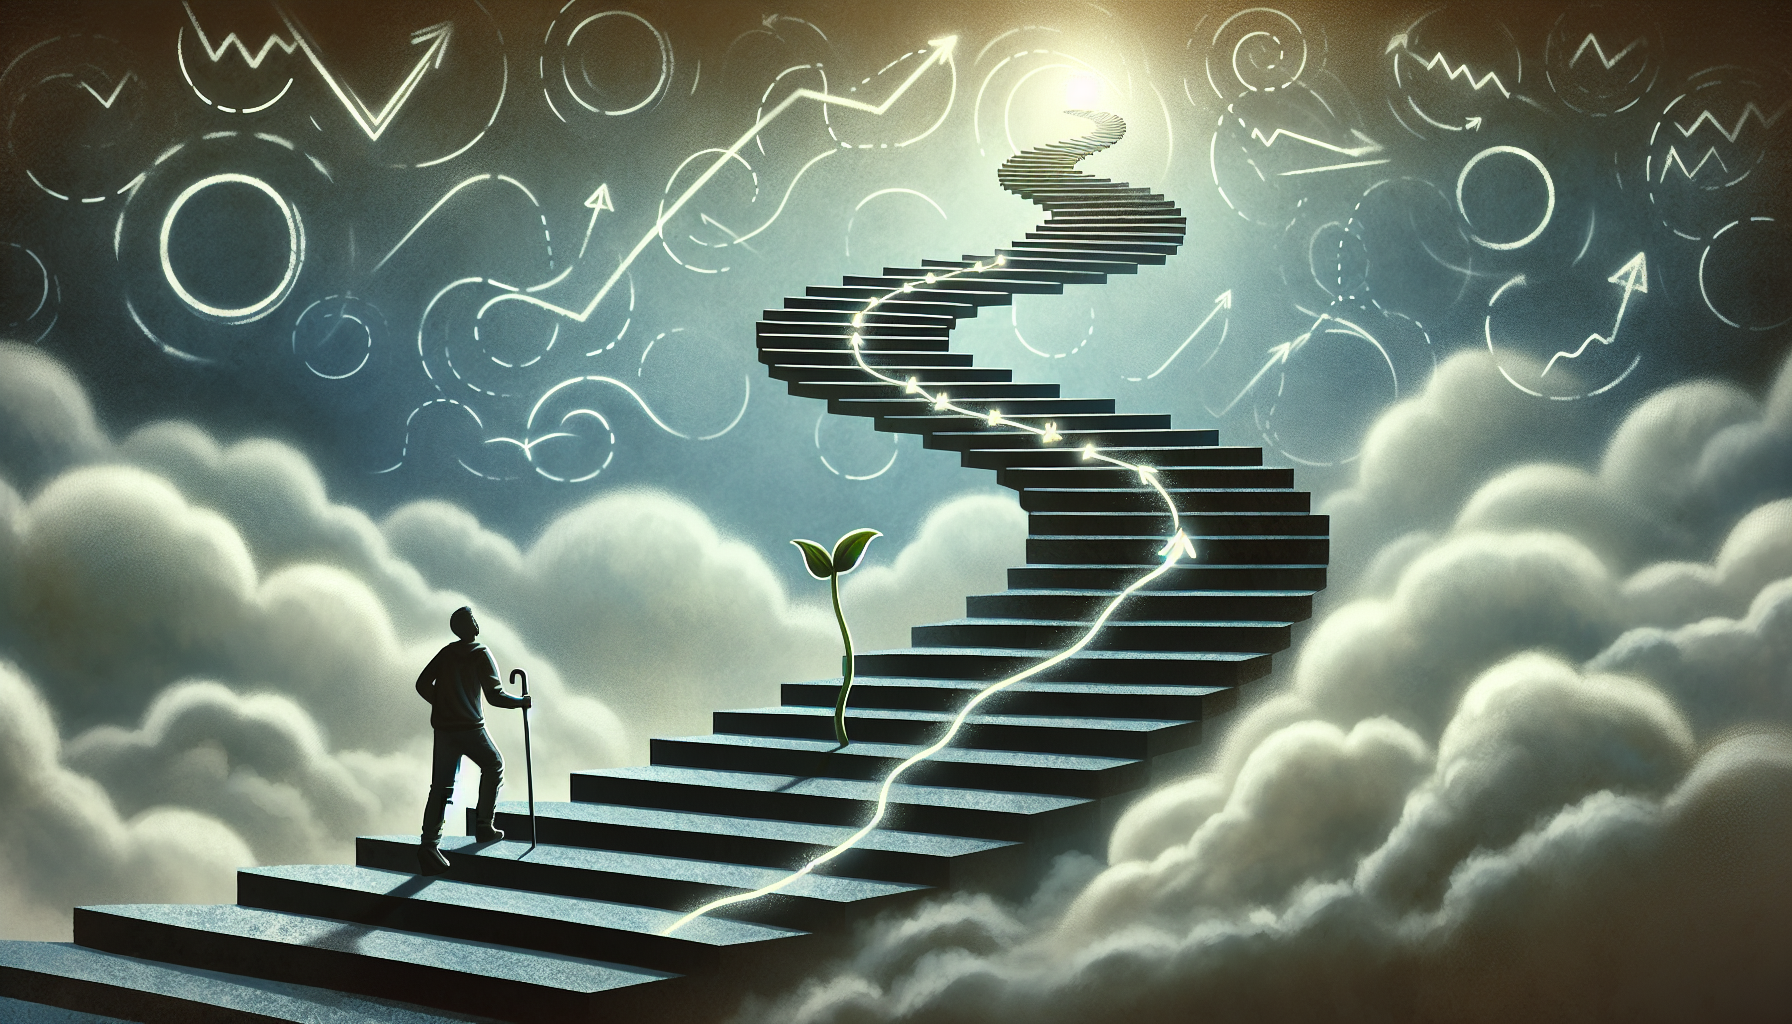 Illustration of a person climbing a staircase of continuous improvement